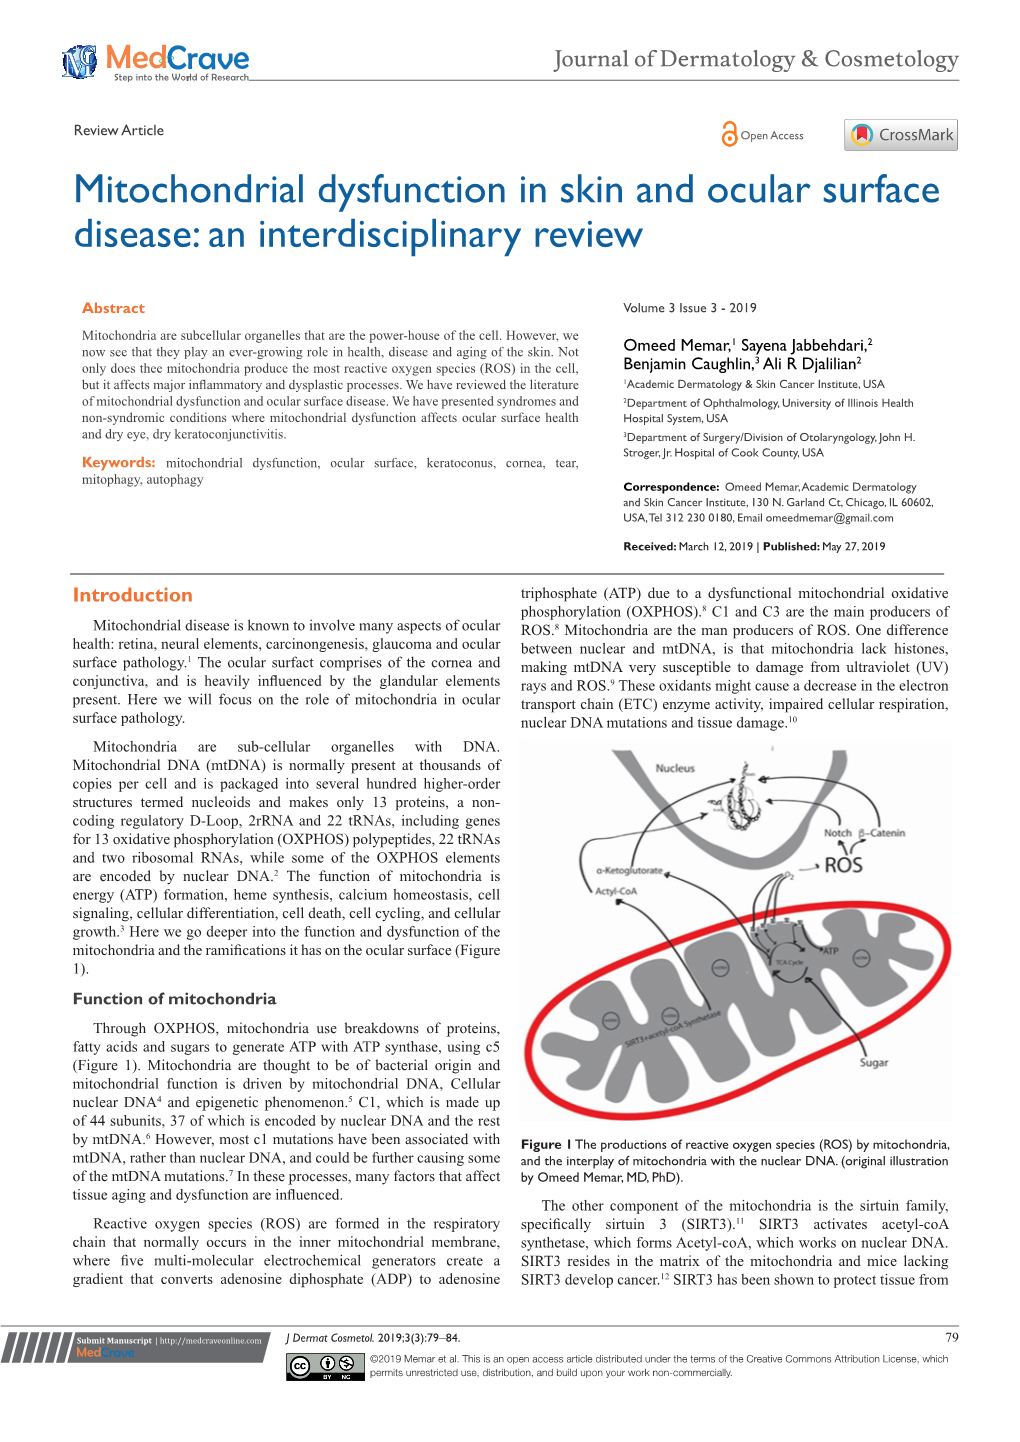 Mitochondrial Dysfunction in Skin and Ocular Surface Disease: an Interdisciplinary Review